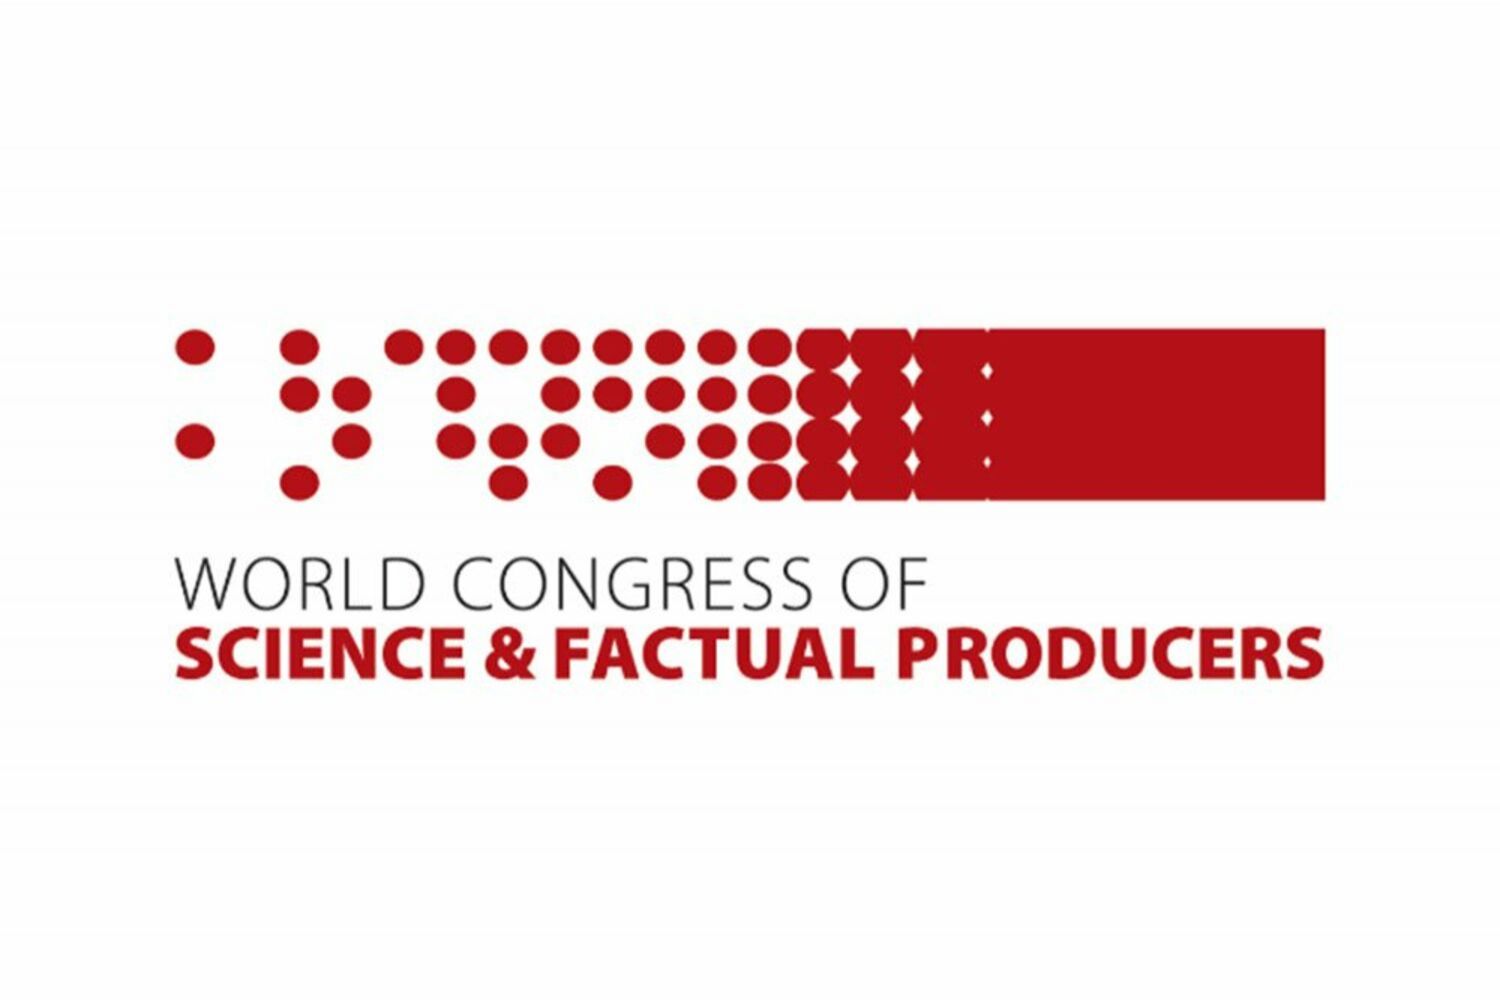 World Congress of Science & Factual Producers